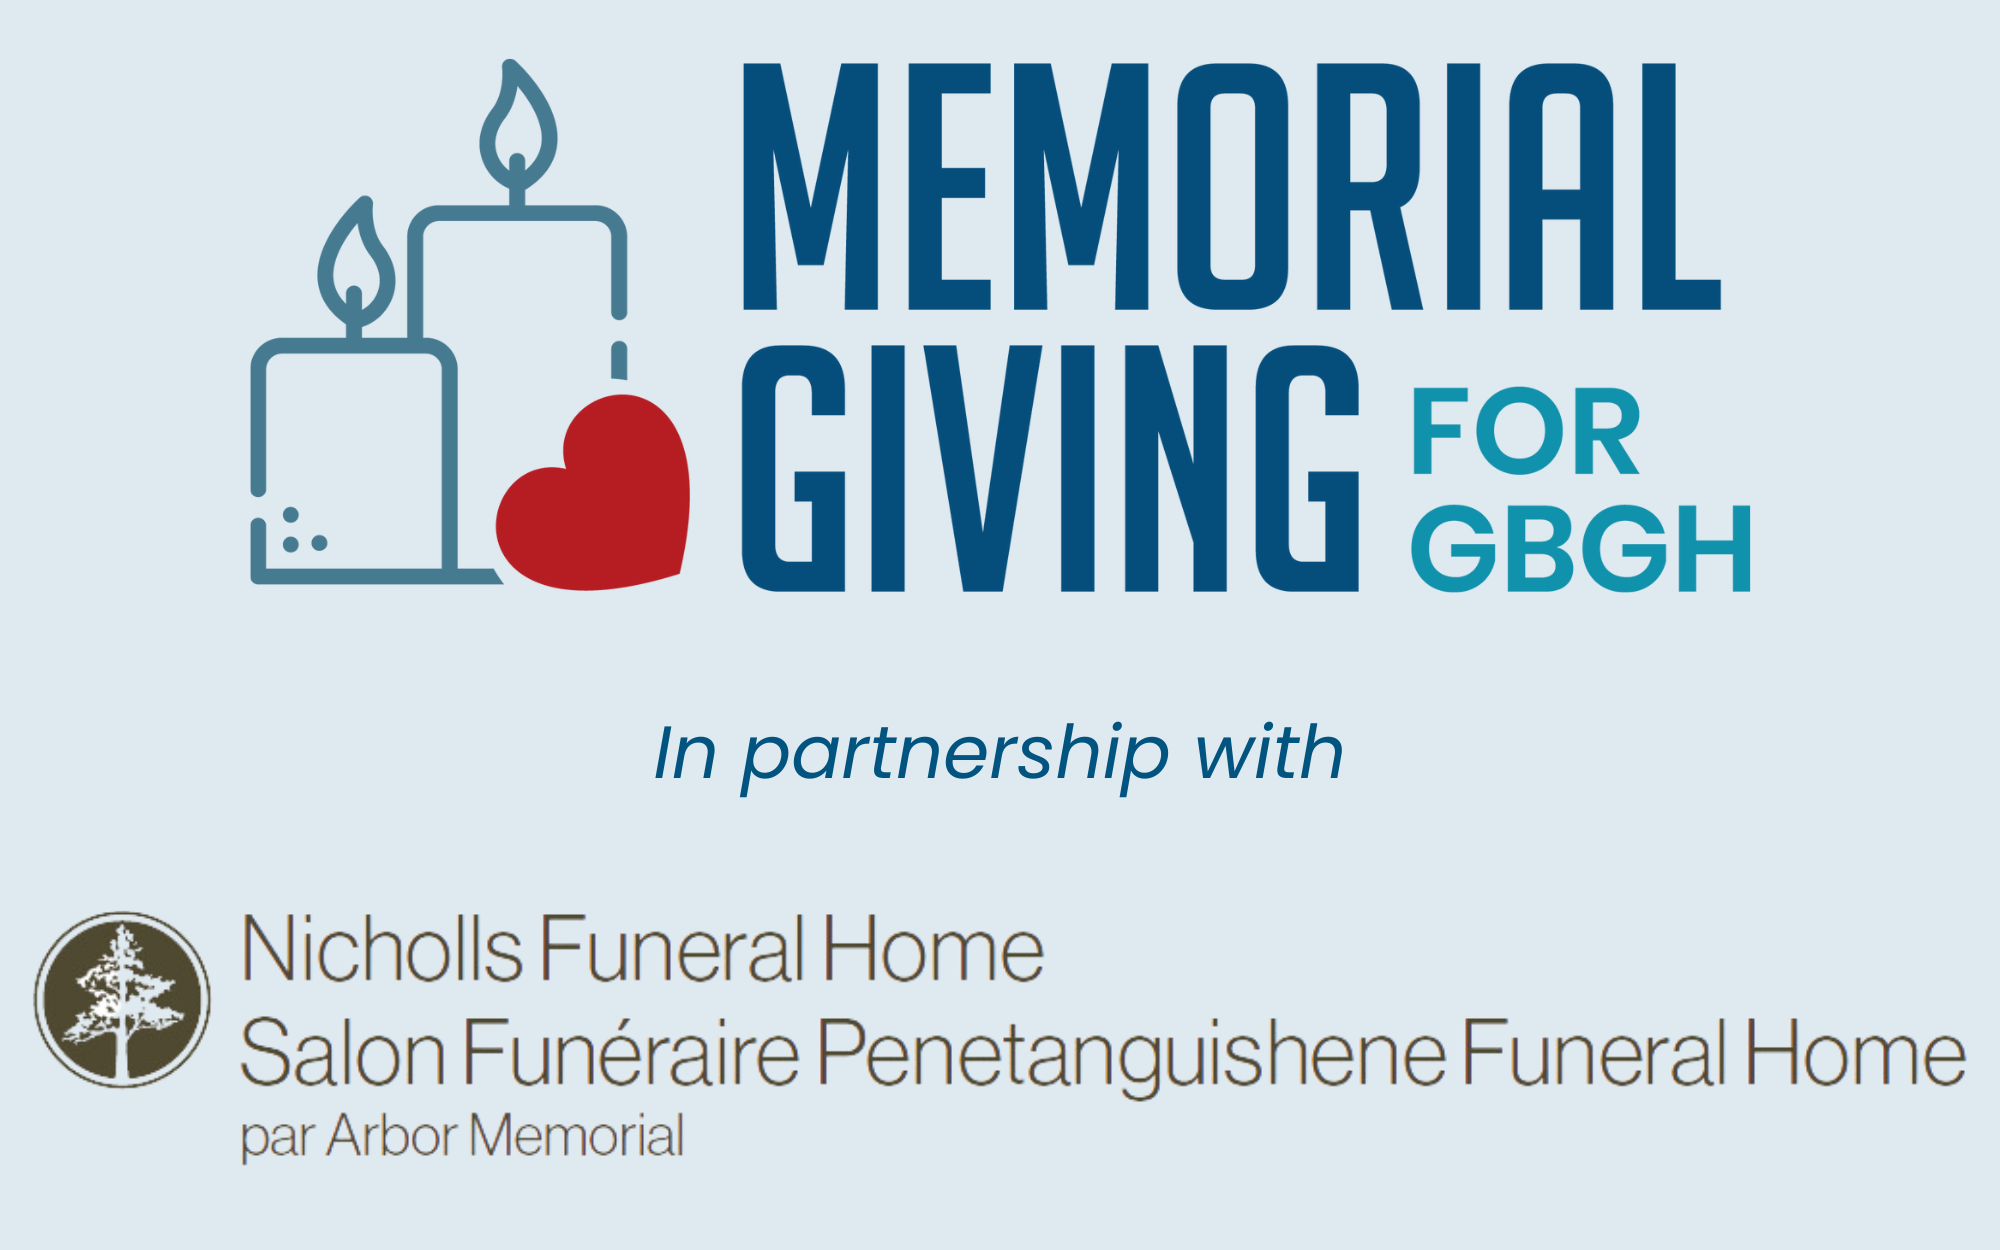 Memorial Giving for GBGH in partnership with Nicholls Funeral Home.